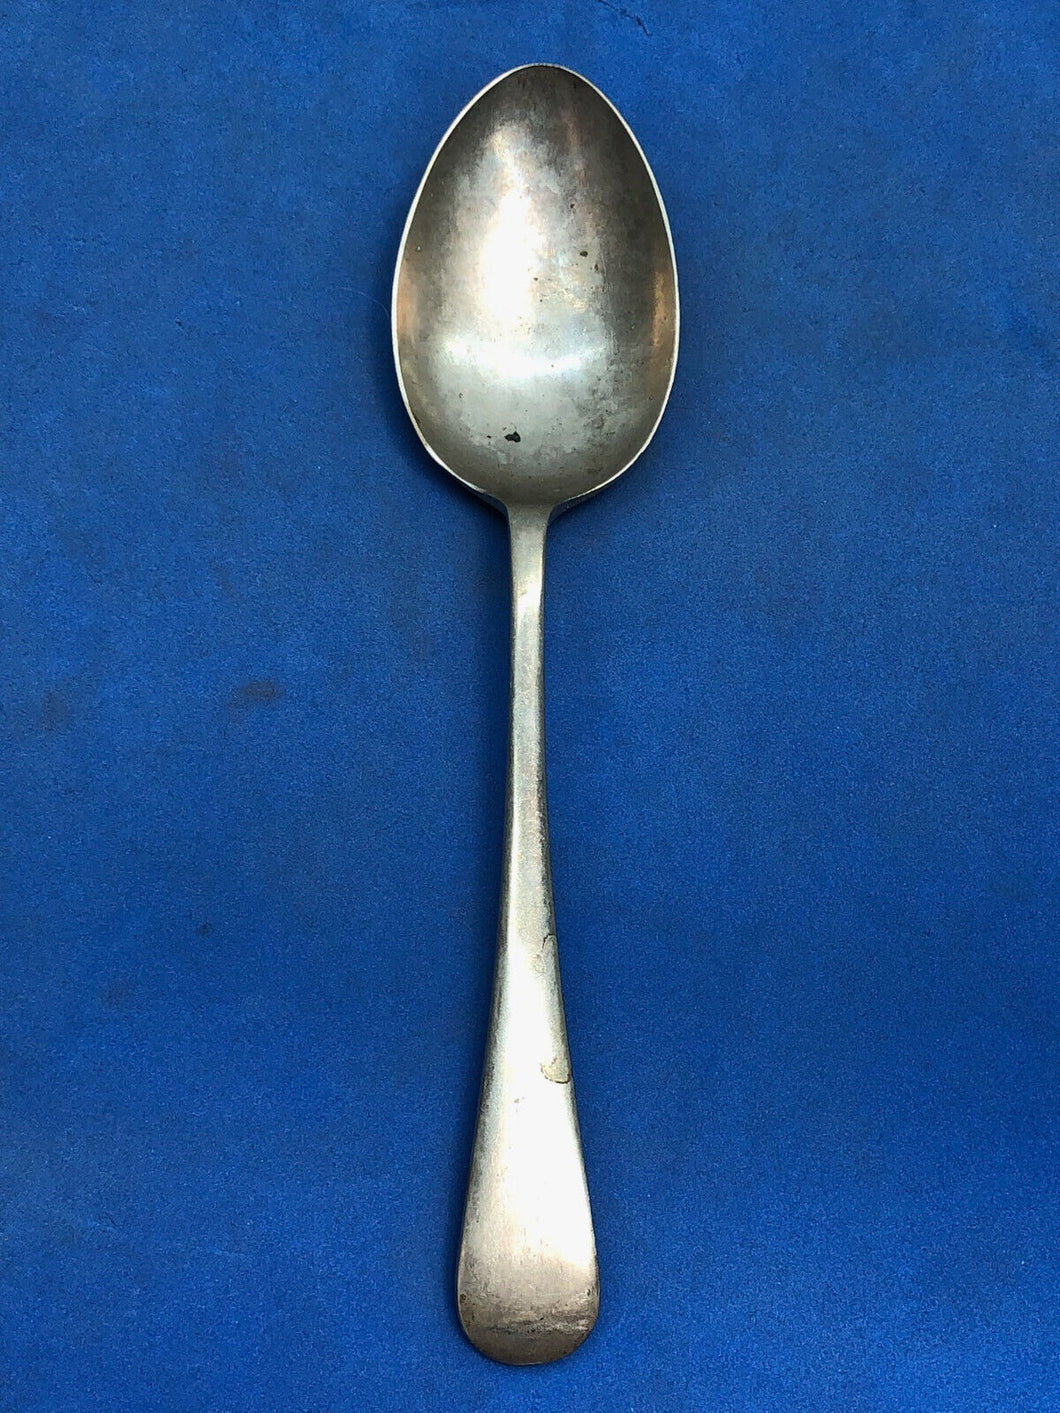 Original WW2 British Army Officers Mess WD Marked Cutlery Spoon - 1940